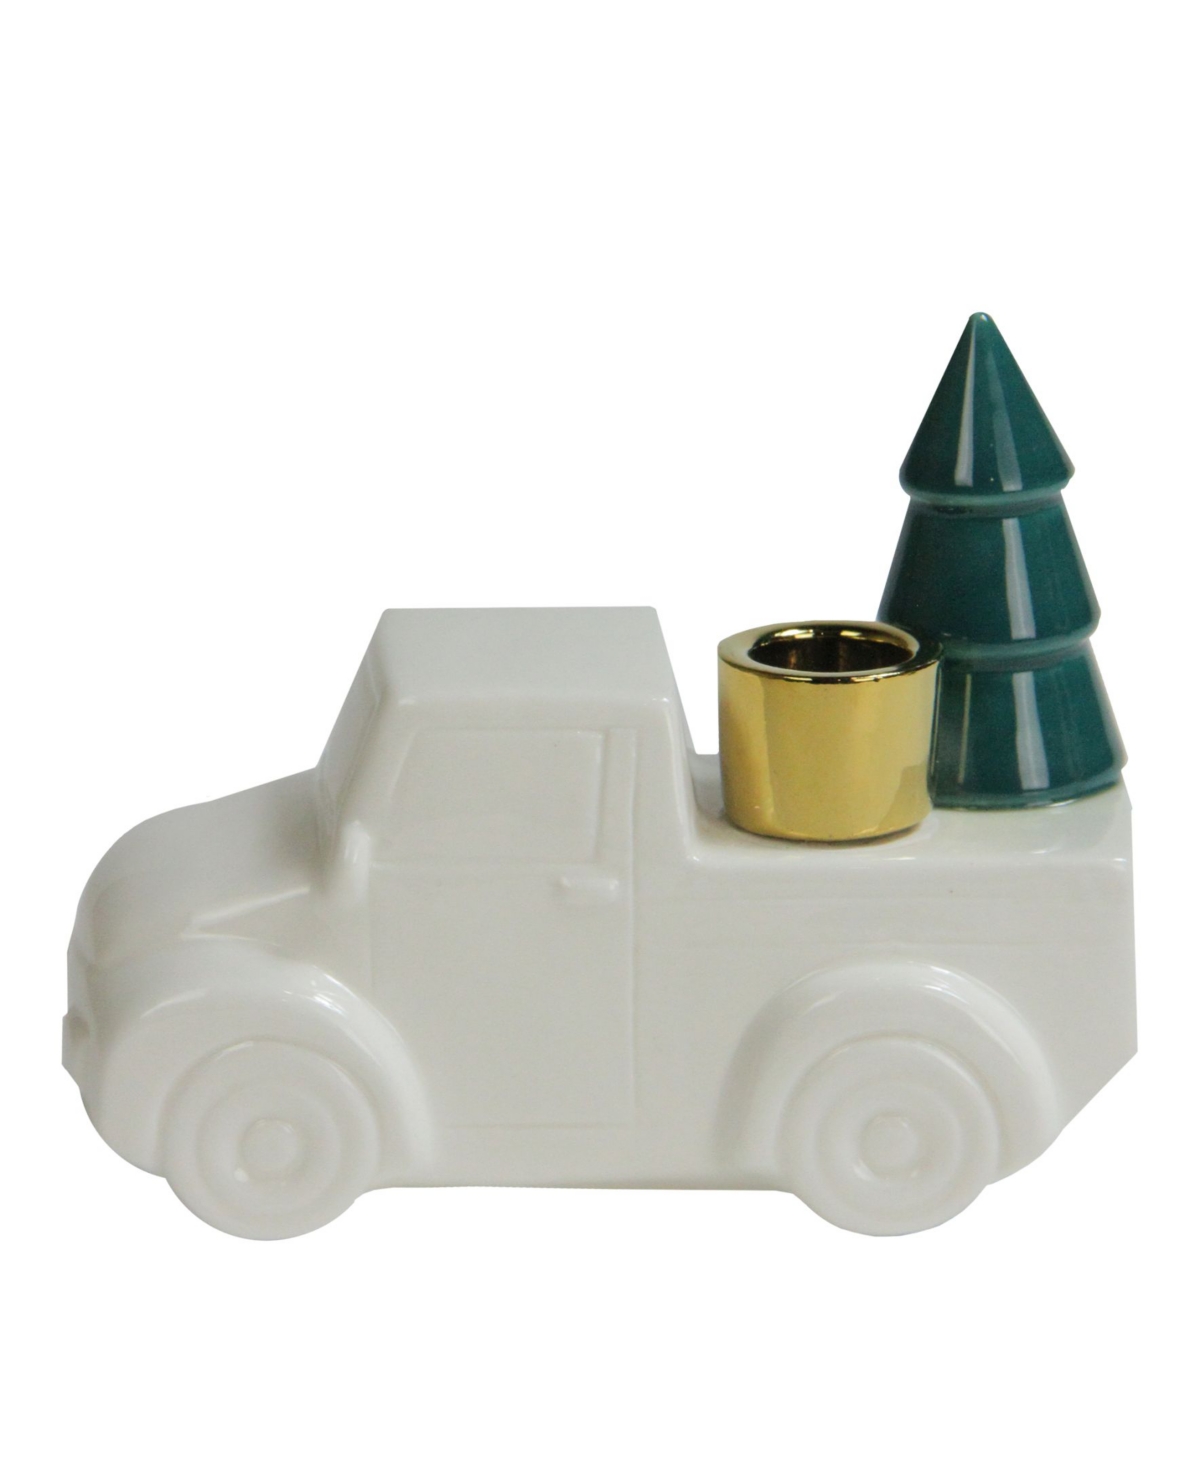 6 Ceramic Truck with Christmas Tree Taper Candlestick Holder - White